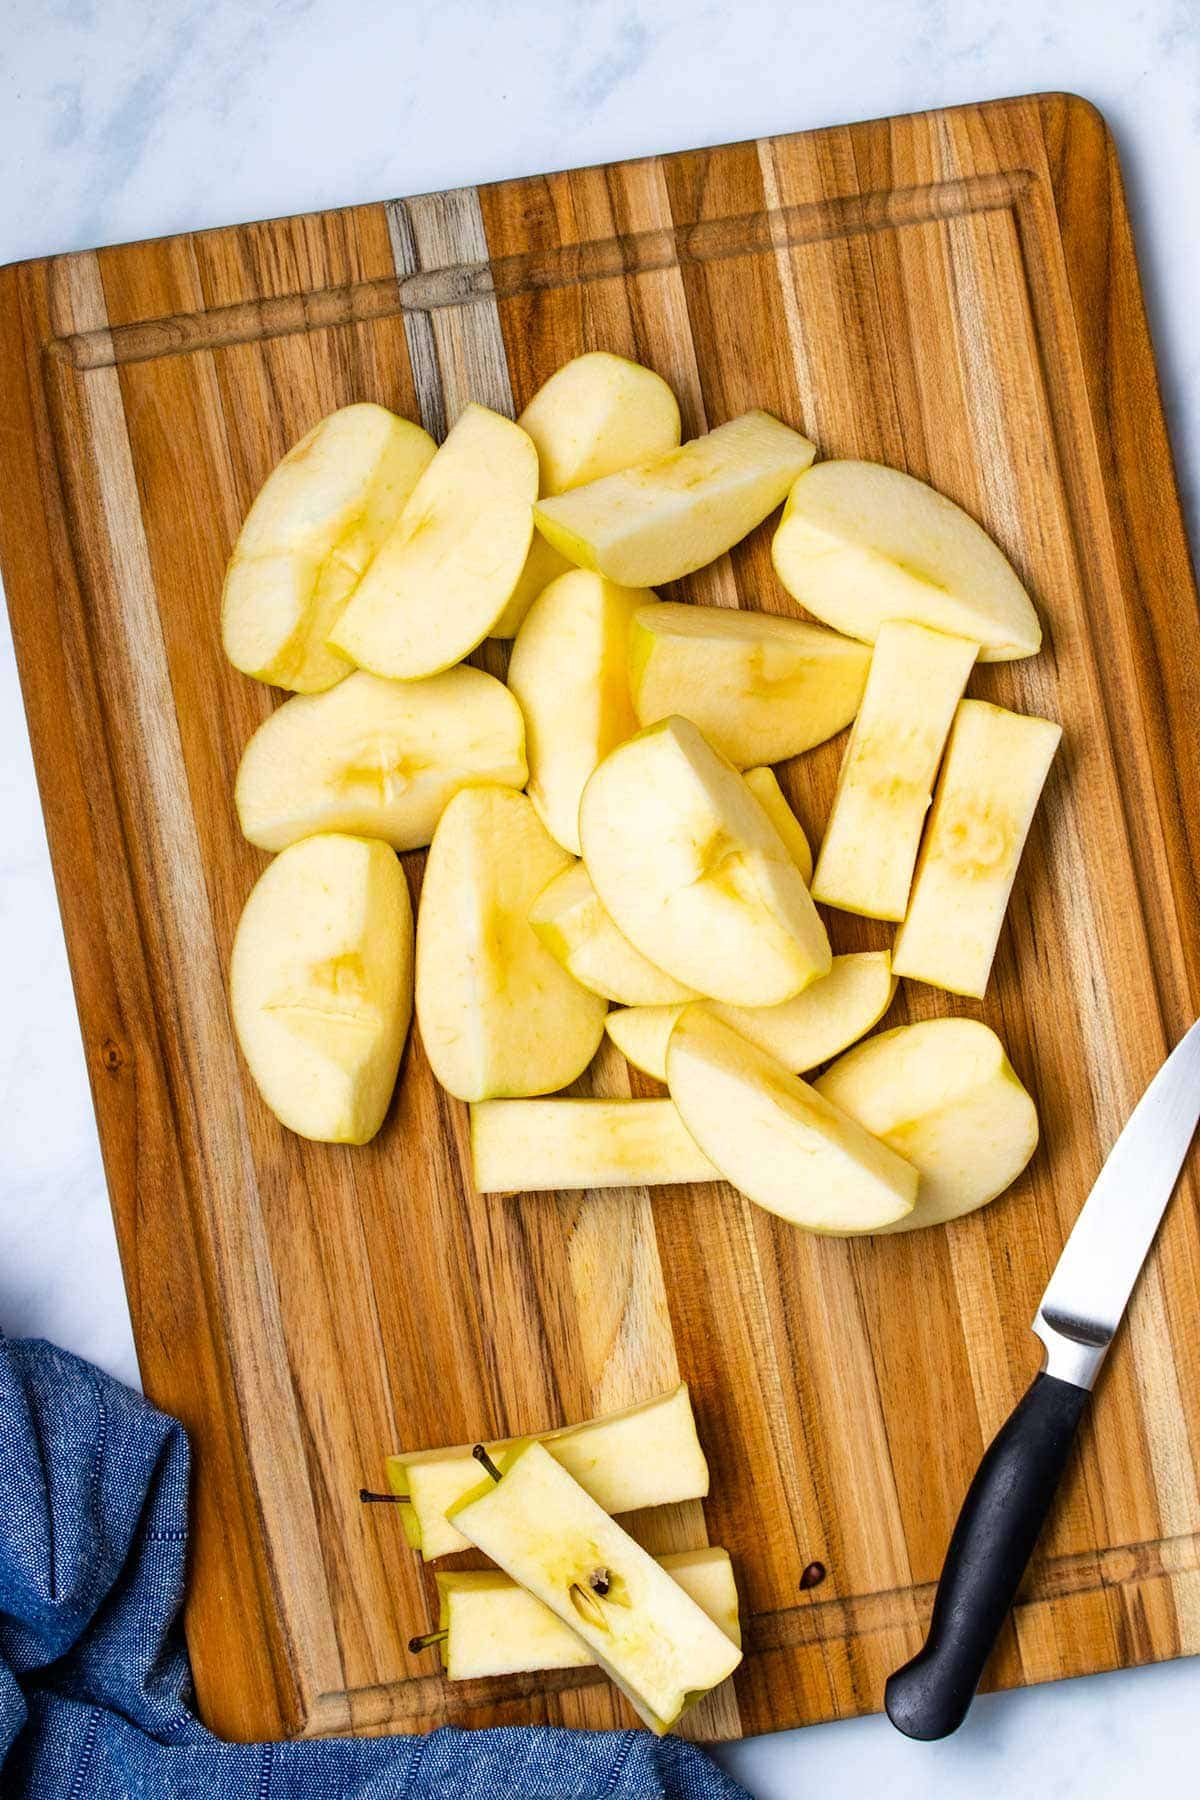 sliced apples on a wooden cutting board with a black-handled paring knife next to a blue linen